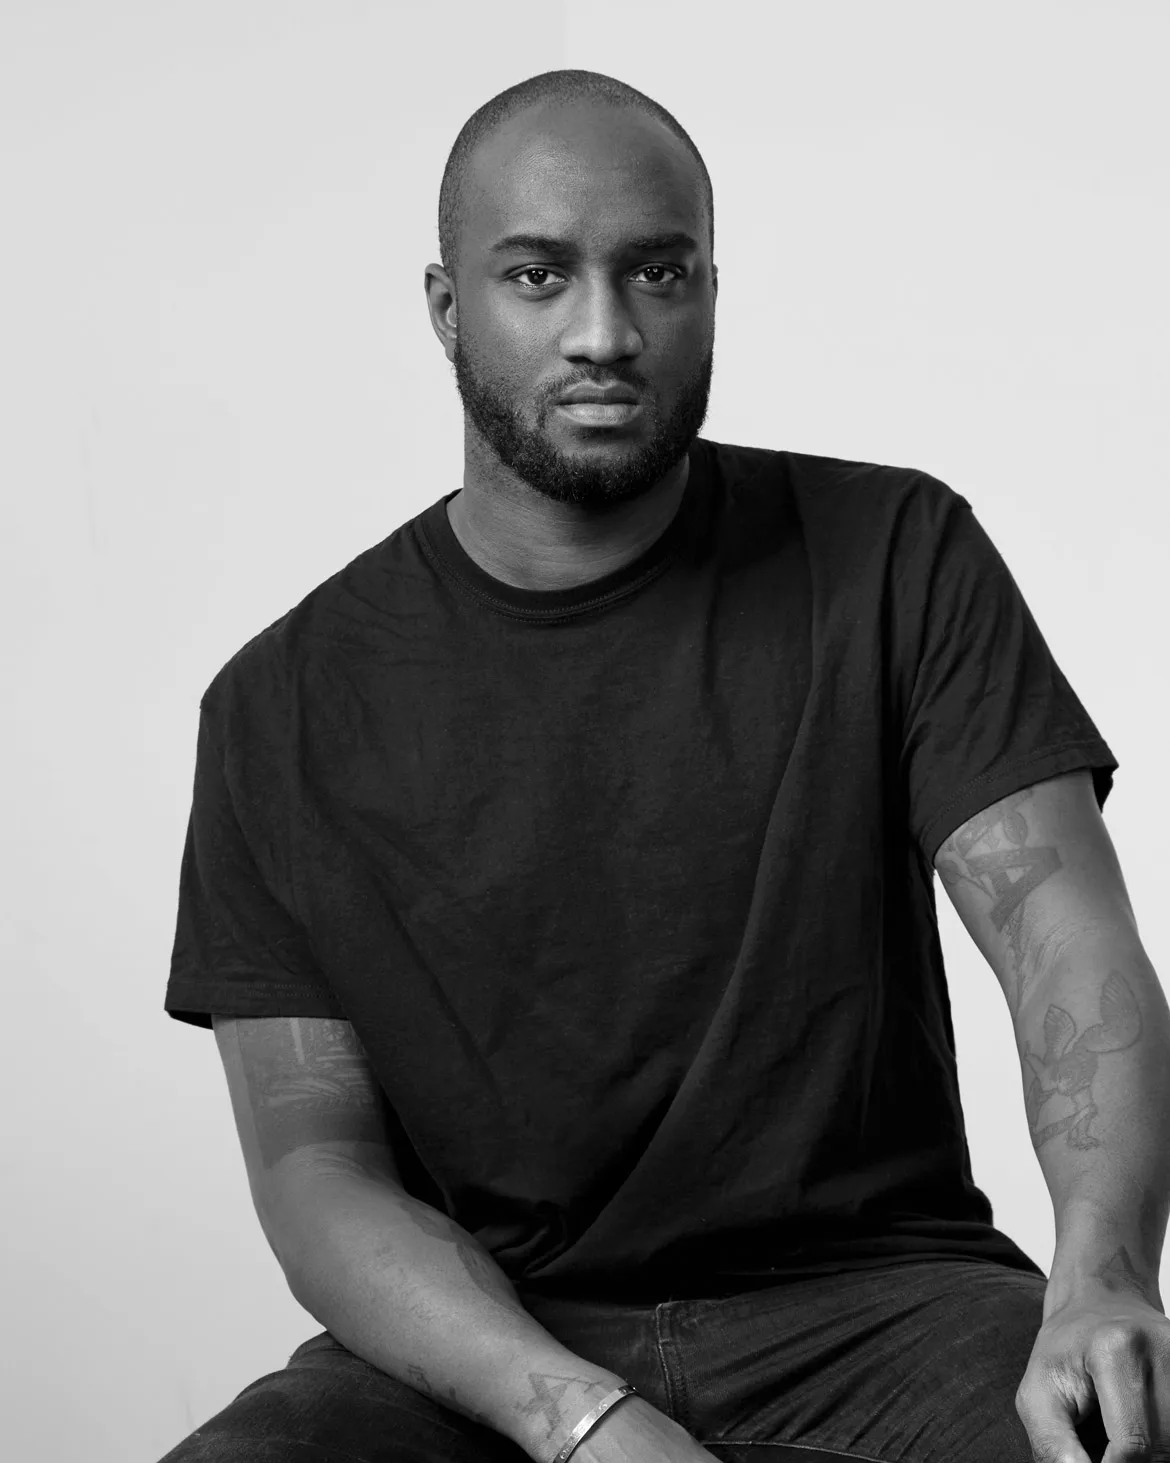 Virgil Abloh exhibition at Brooklyn Museum includes a full-scale house